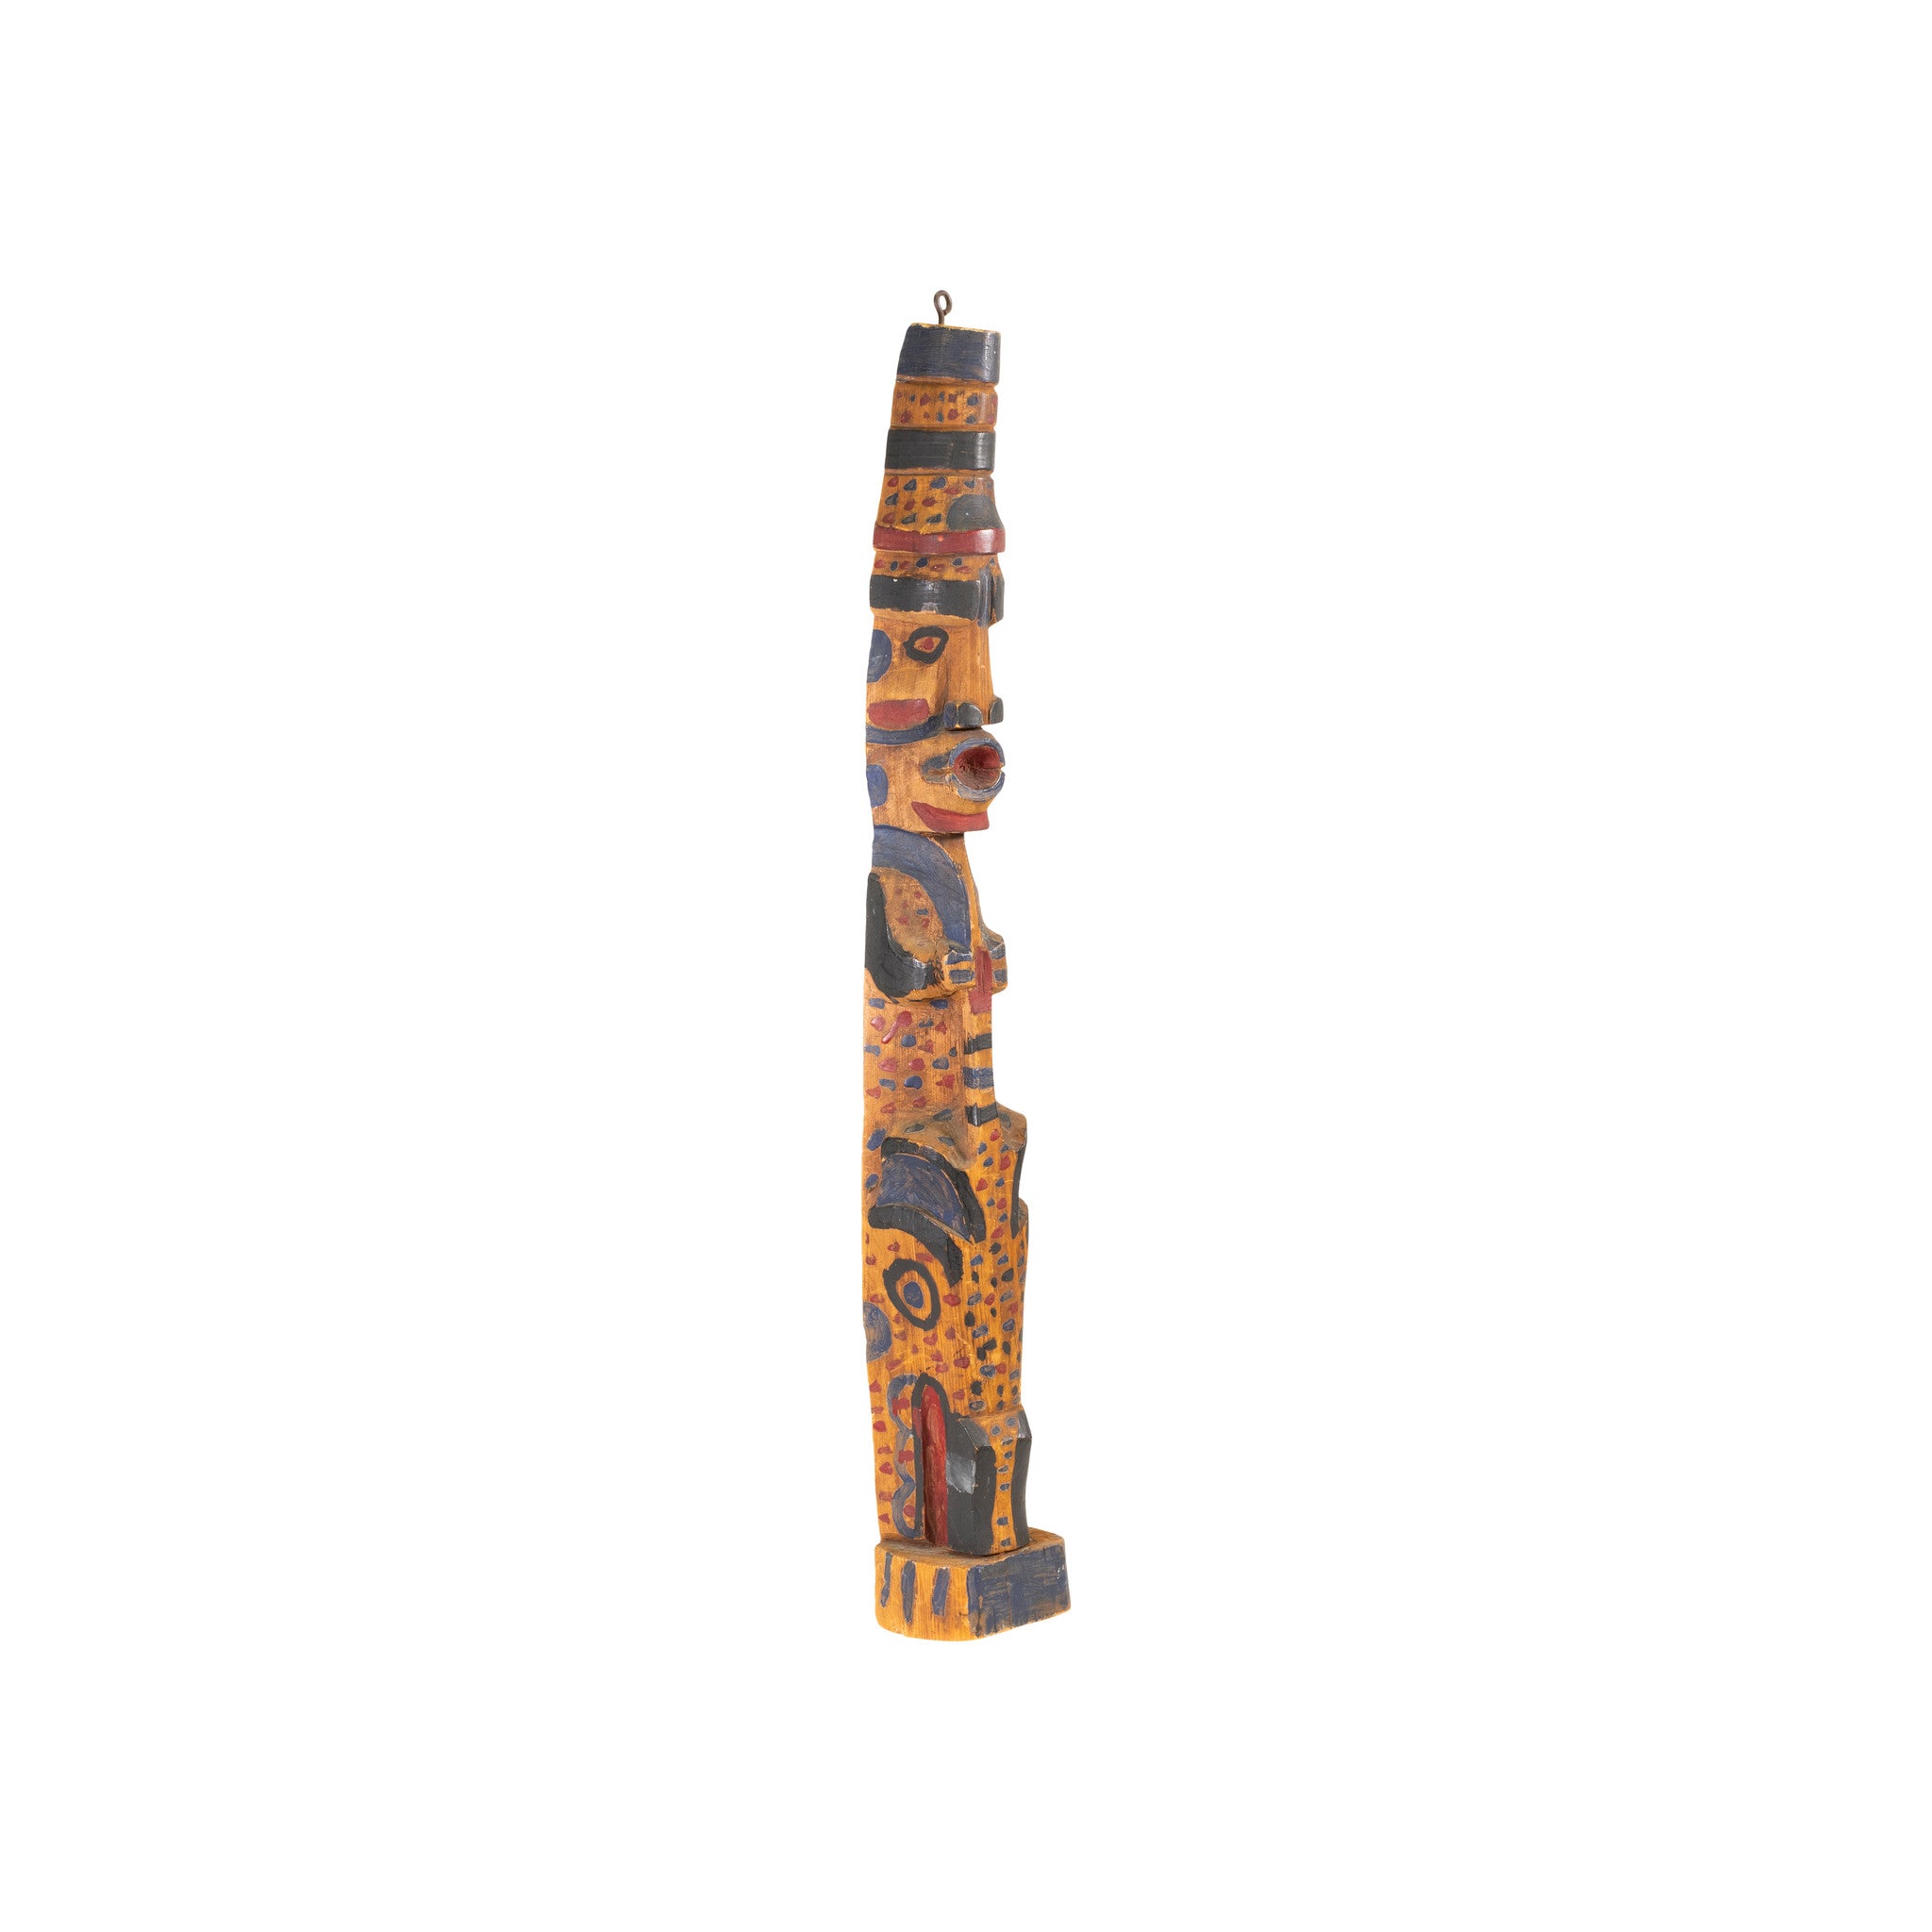 Large Quileute or Makah Totem Pole